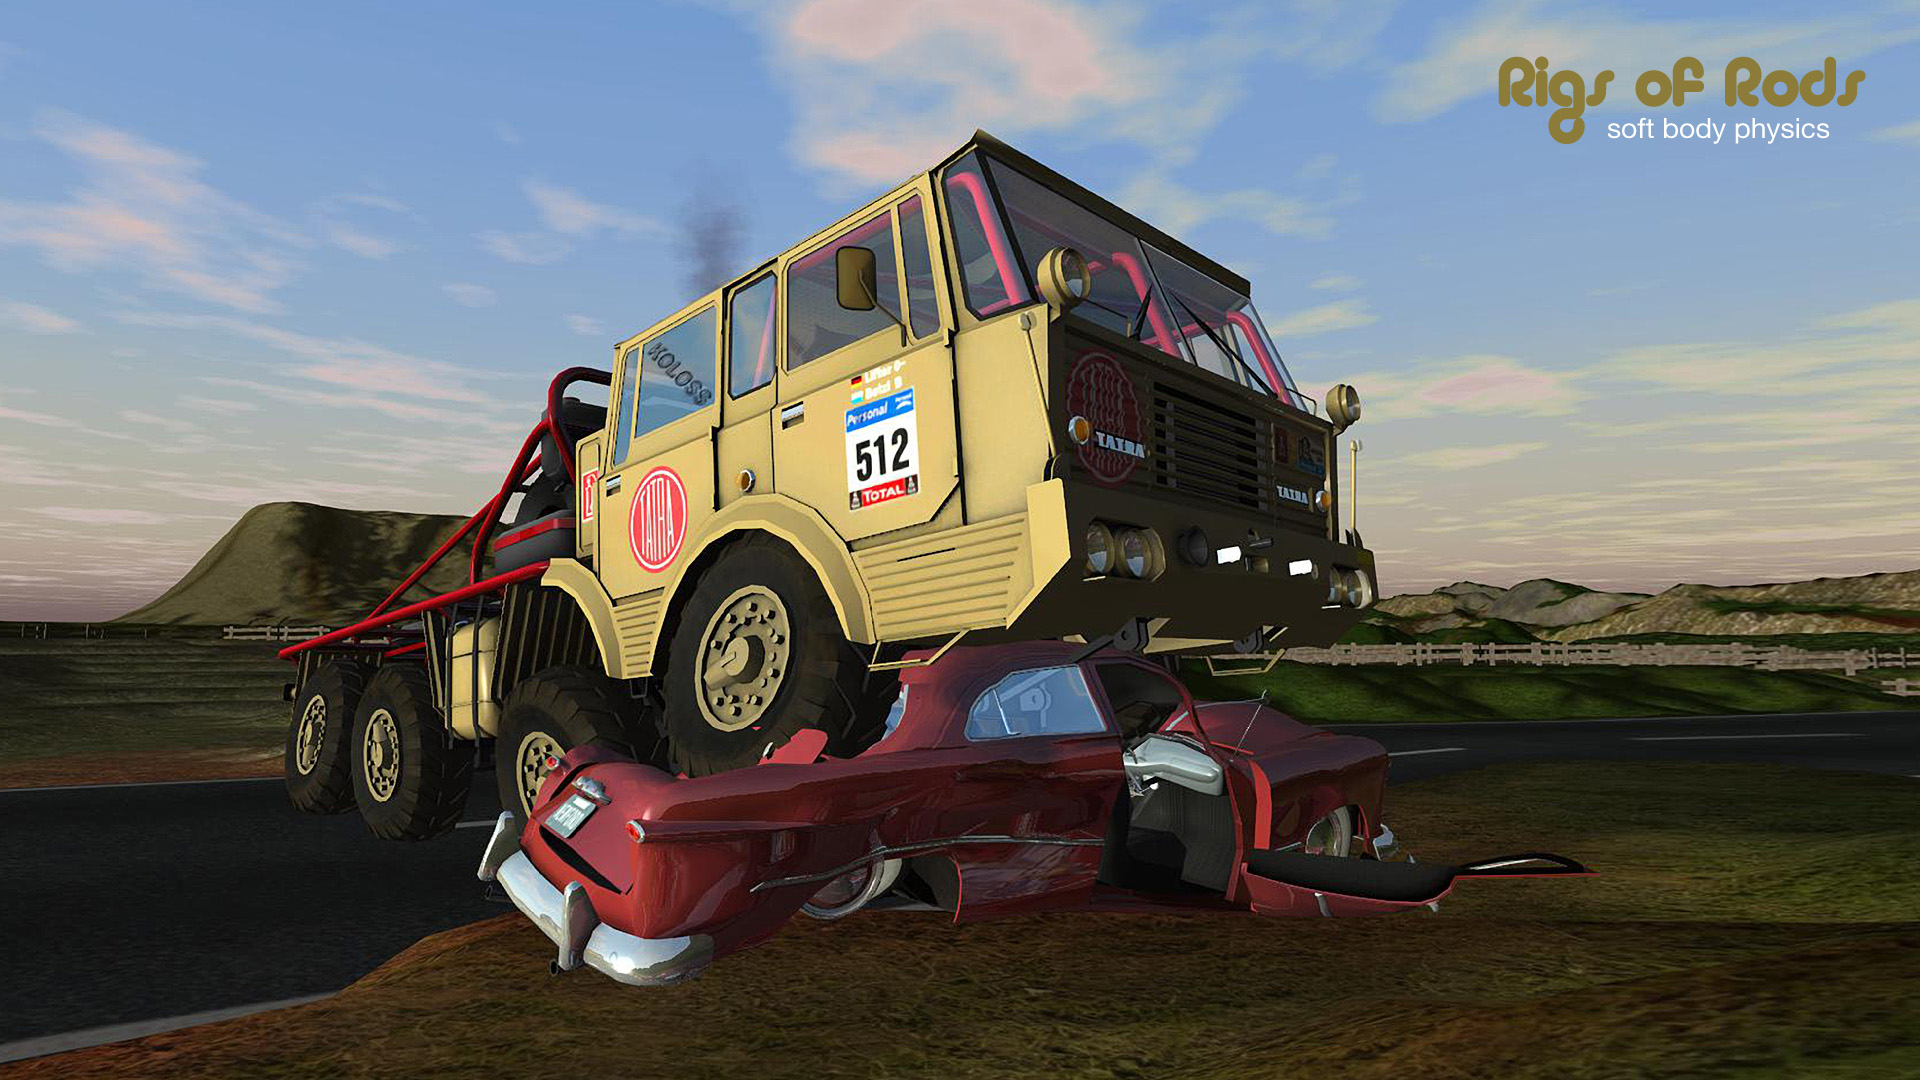 brick rigs vehicle download location